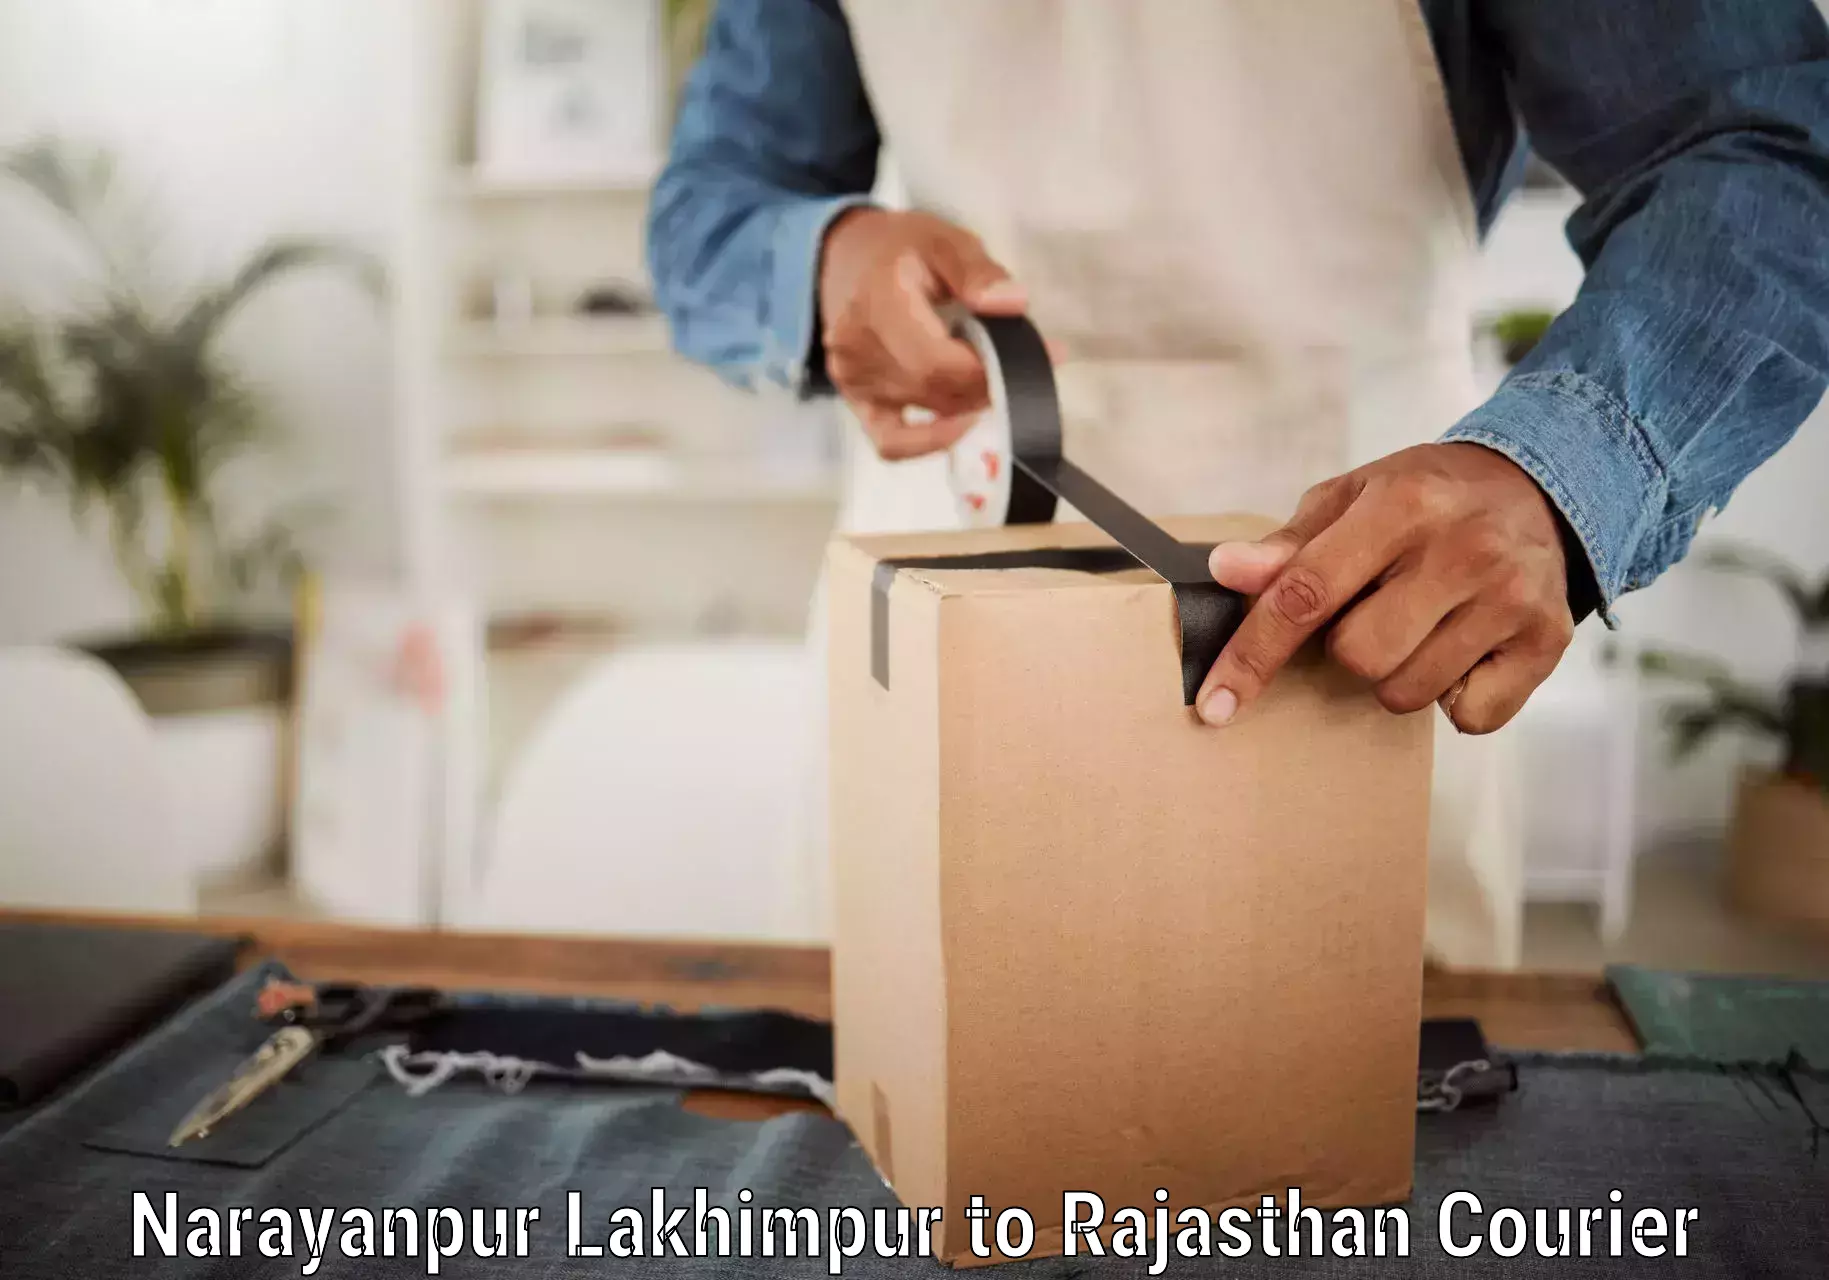 Reliable delivery network Narayanpur Lakhimpur to Dausa